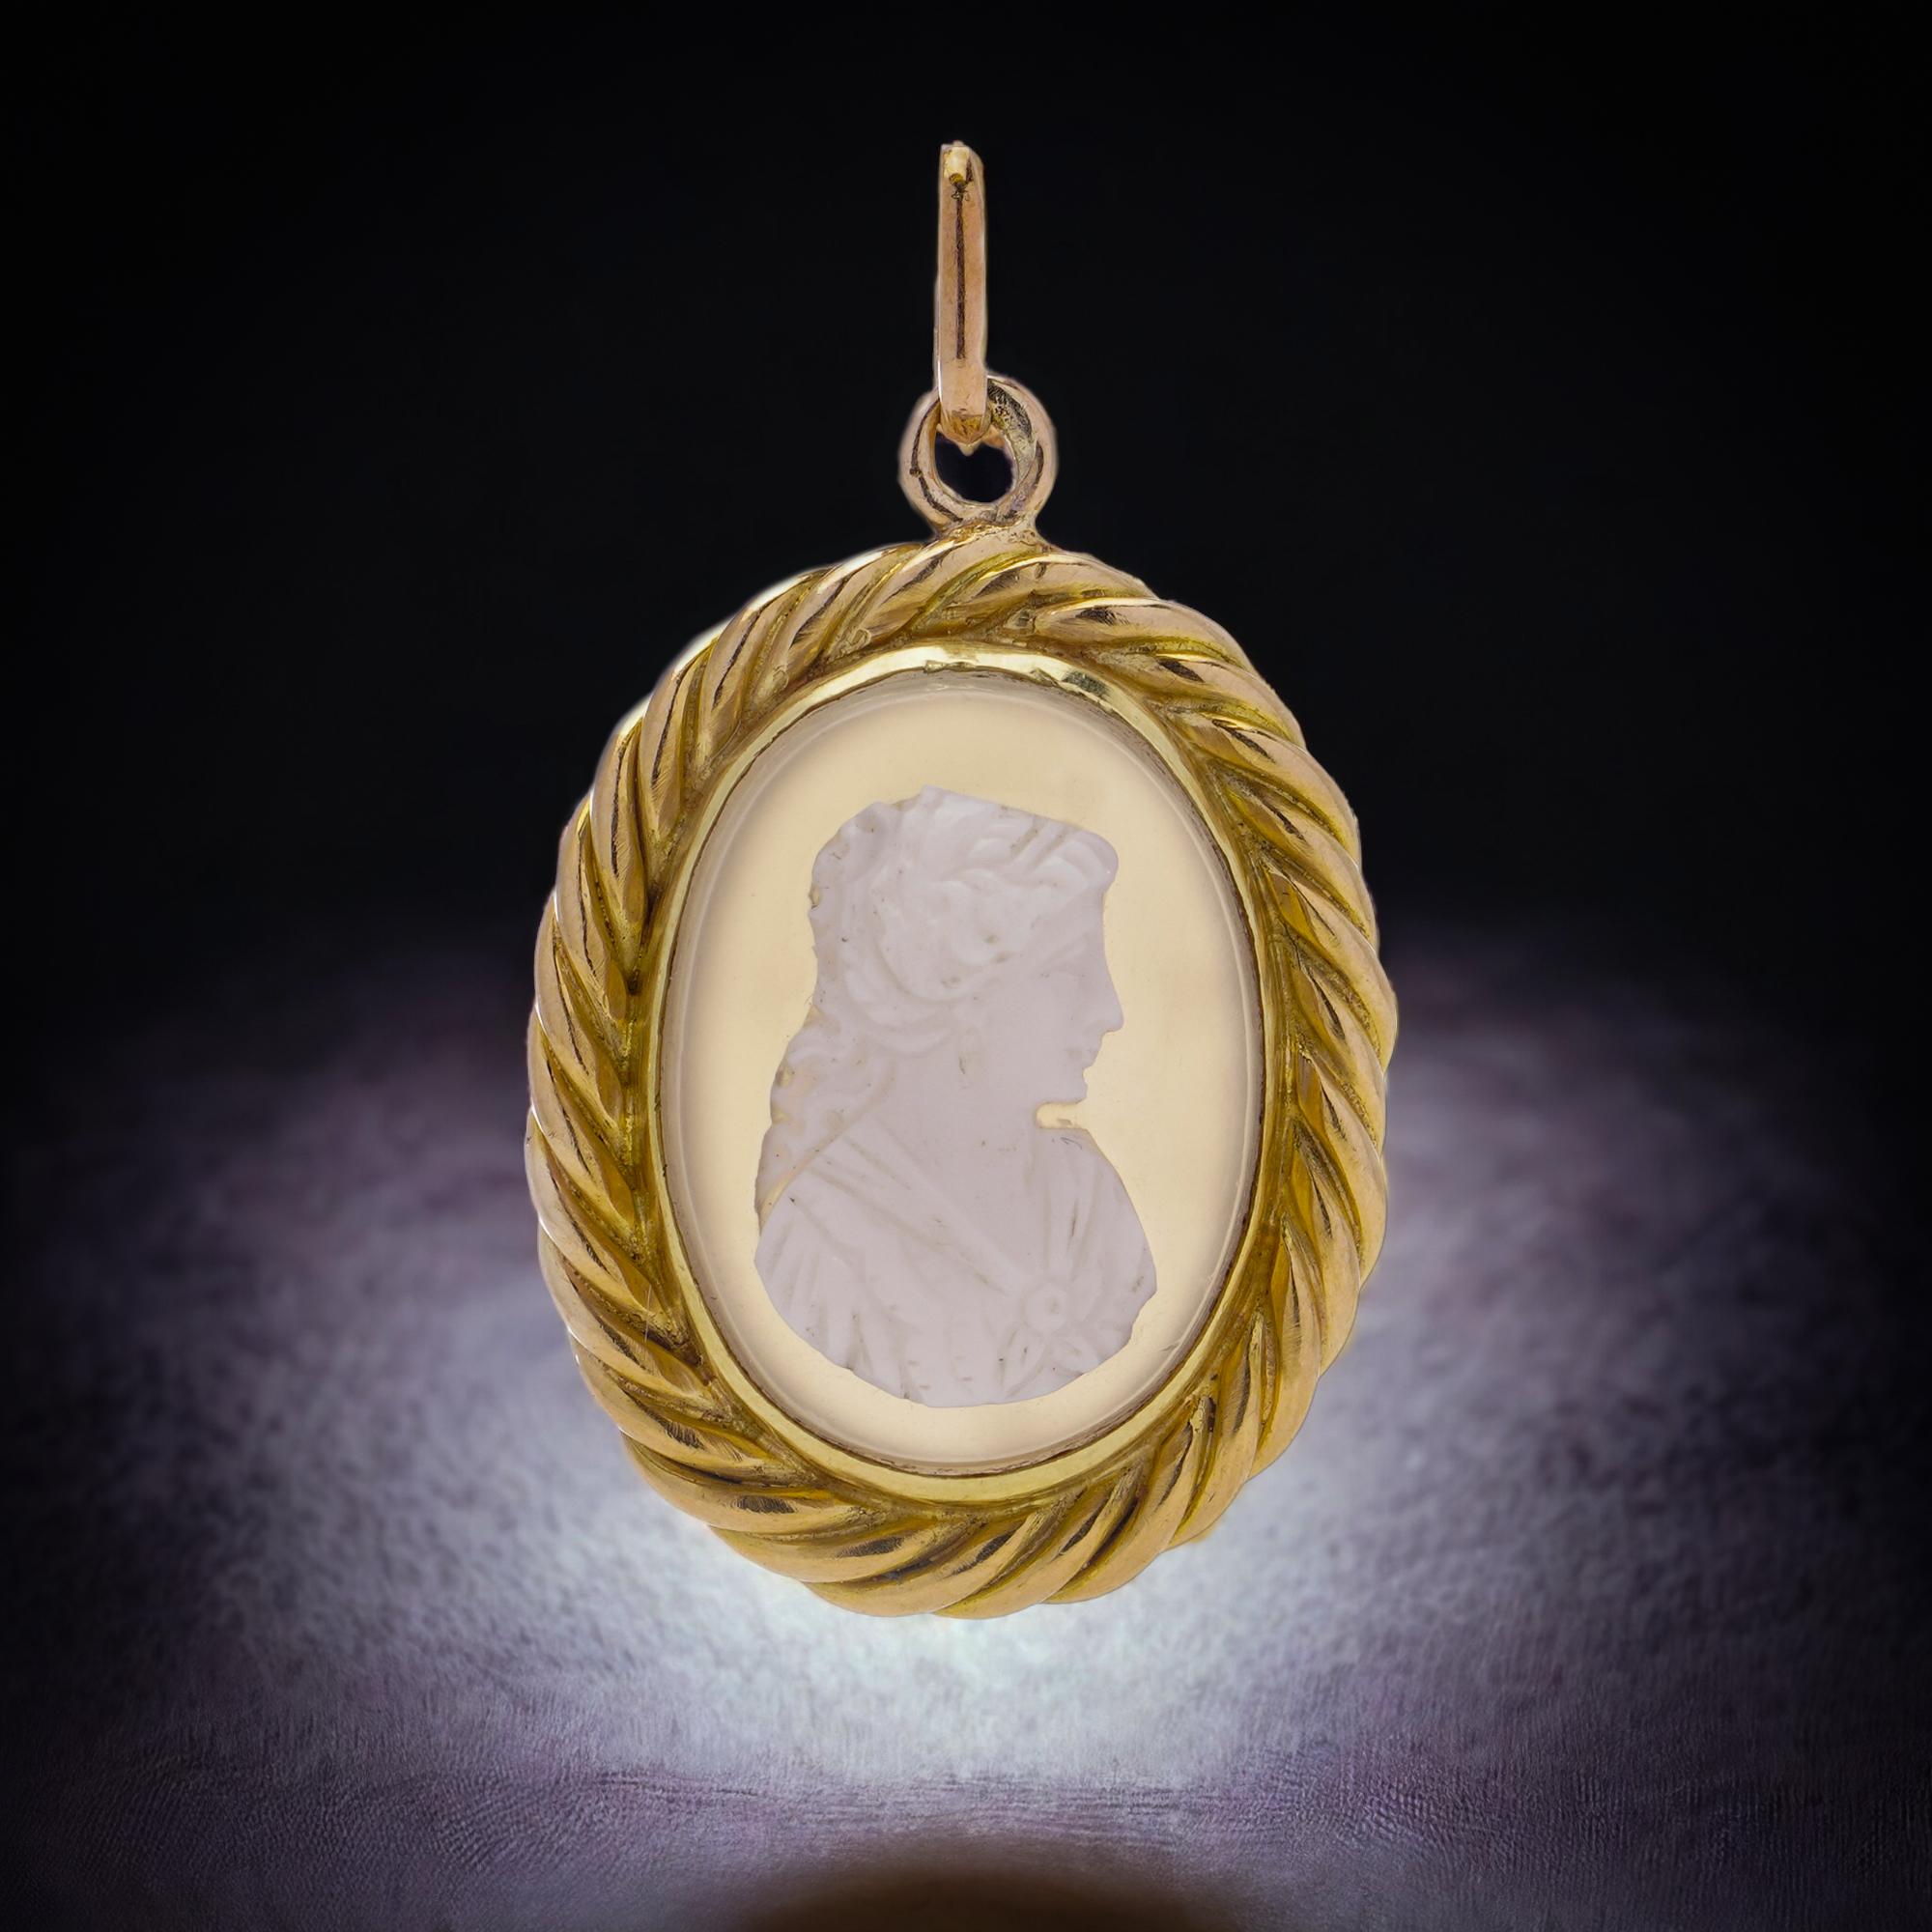 A 19th-century pendant crafted from intricately carved shell and chalcedony, elegantly set in 20kt yellow gold. This pendant showcases a delicately carved shell cameo depicting the profile of a woman, facing to the right.

Made circa 1860's 
X-Ray